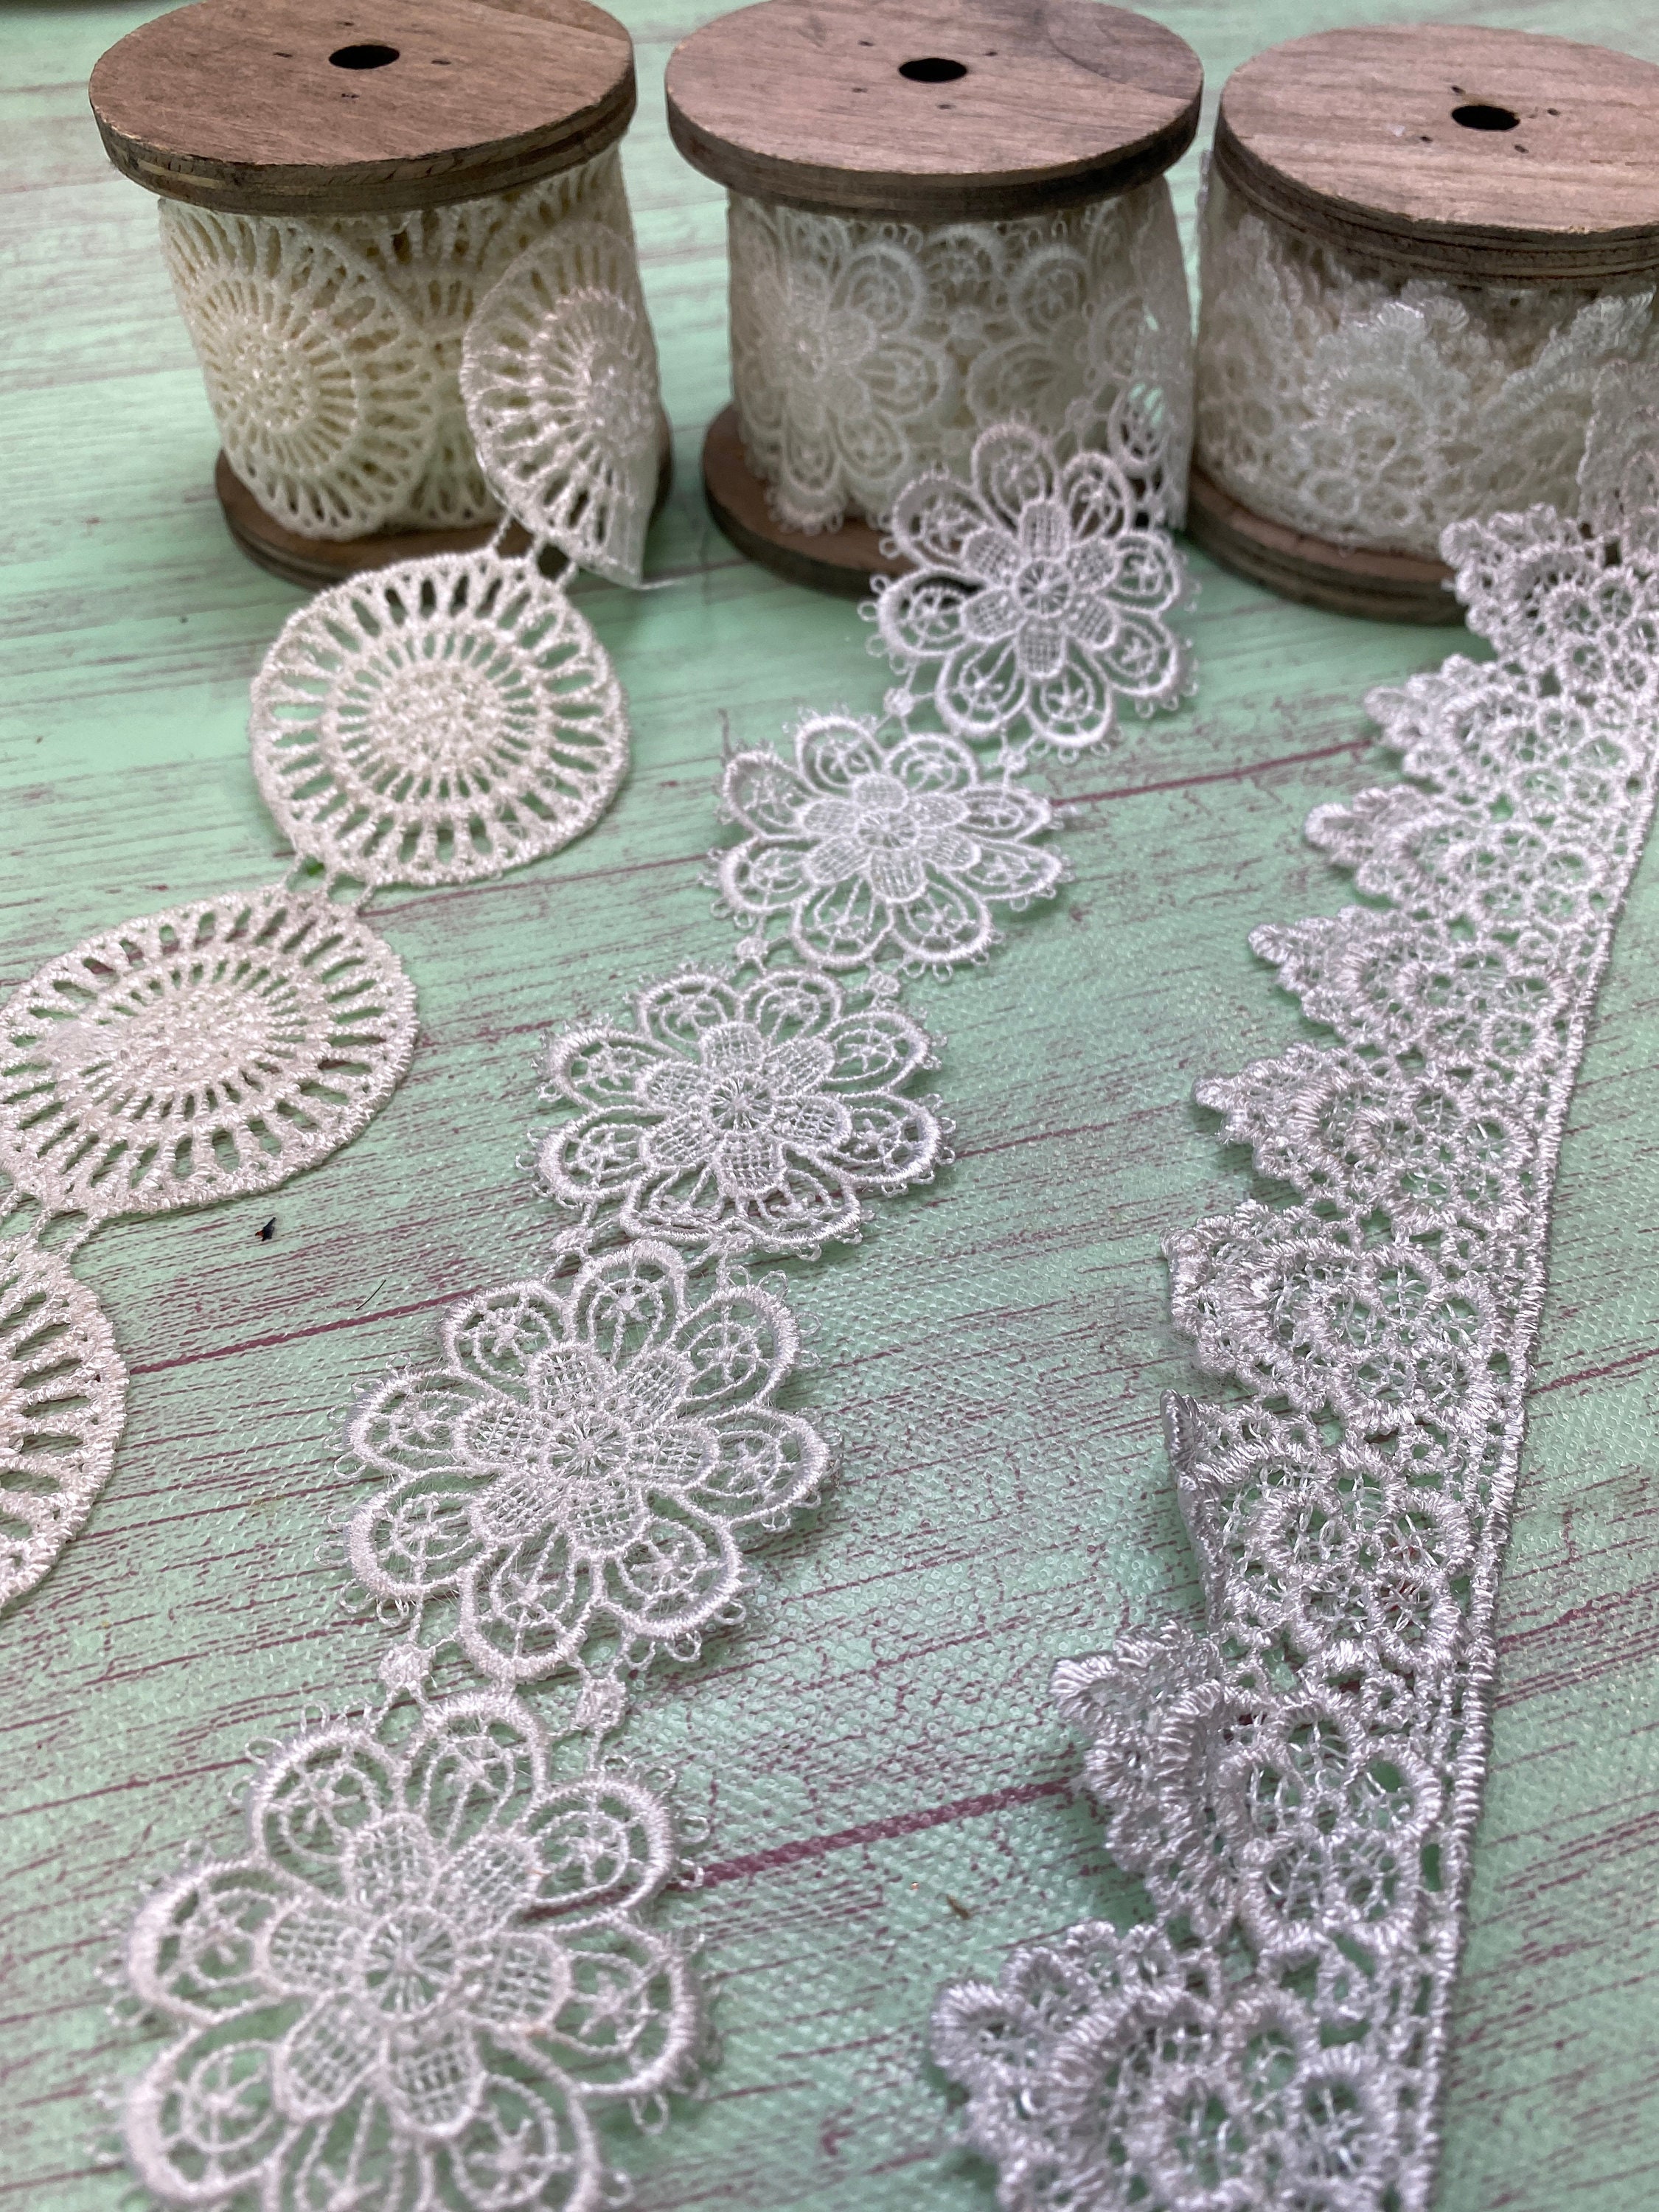 1-Meter Green & White Beautiful Floral Dense Embroidered Pattern Lace Vintage Style Ribbon Trimming Bridal Wedding Scalloped Edge 64mm Wide M3691 